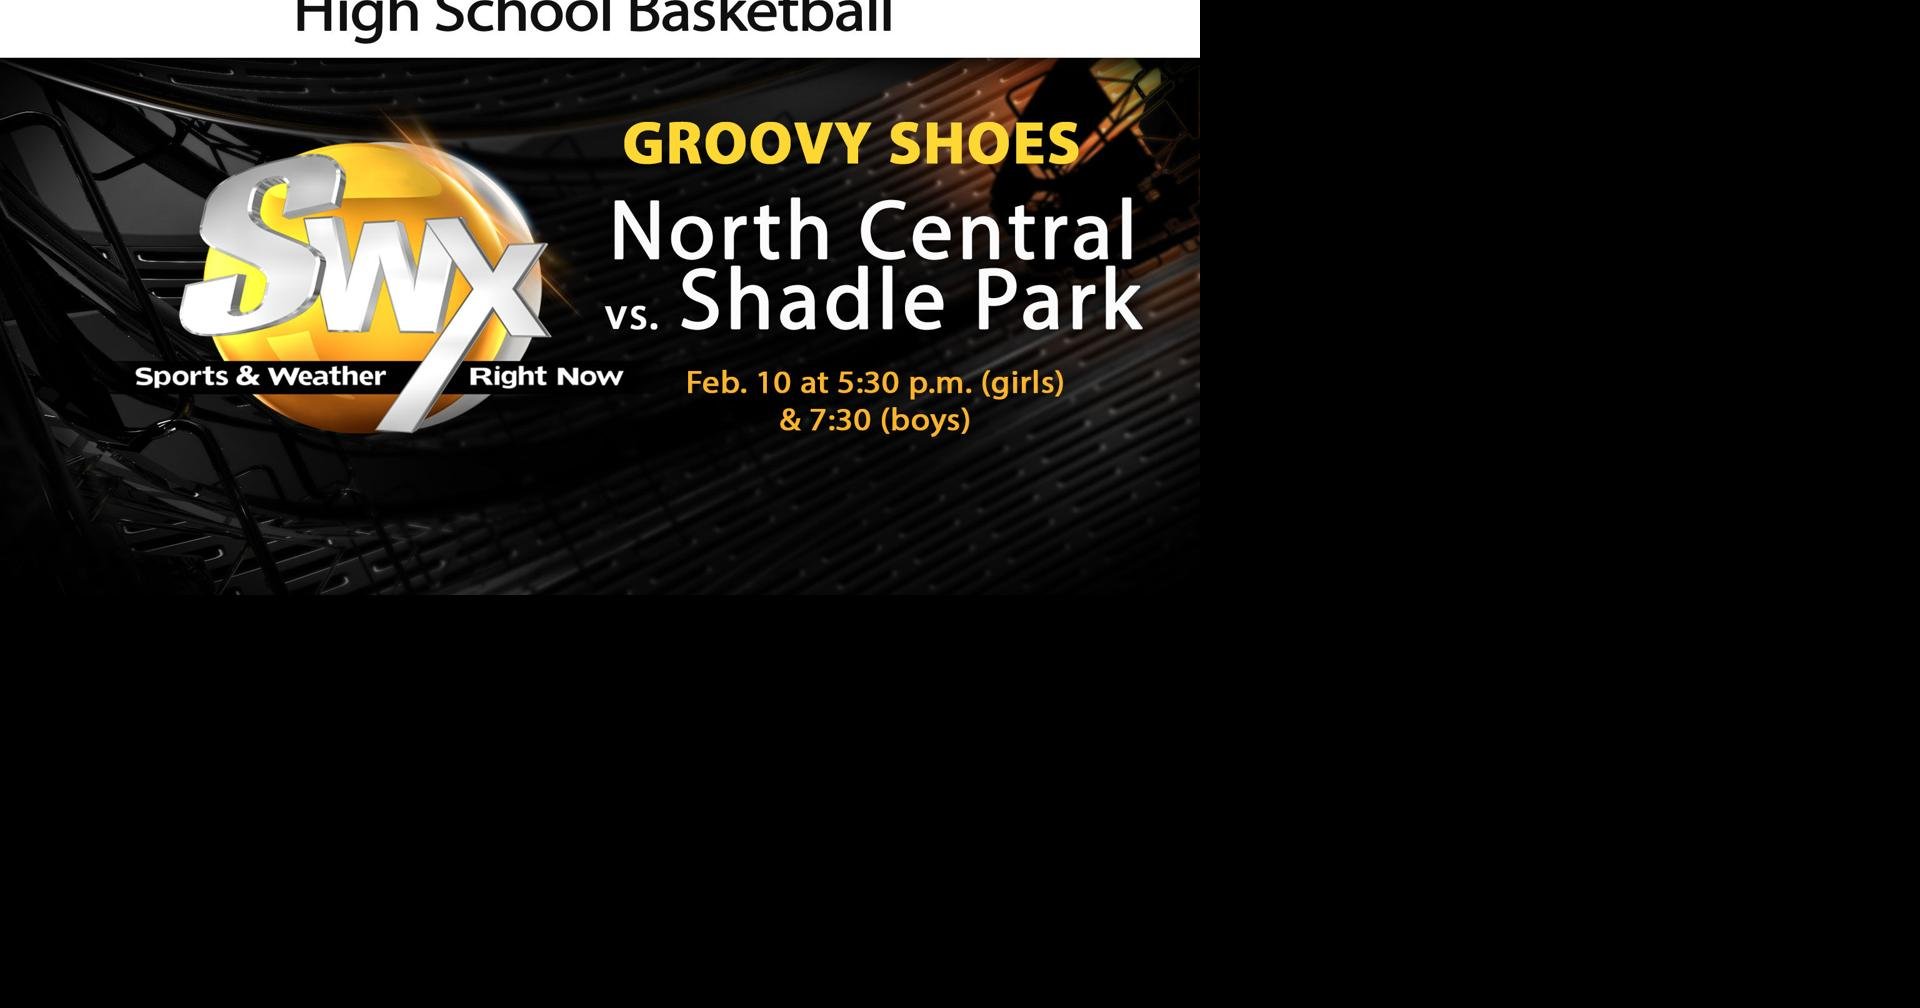 Groovy Shoes North Central vs. Shadle Park SWX Live Streams